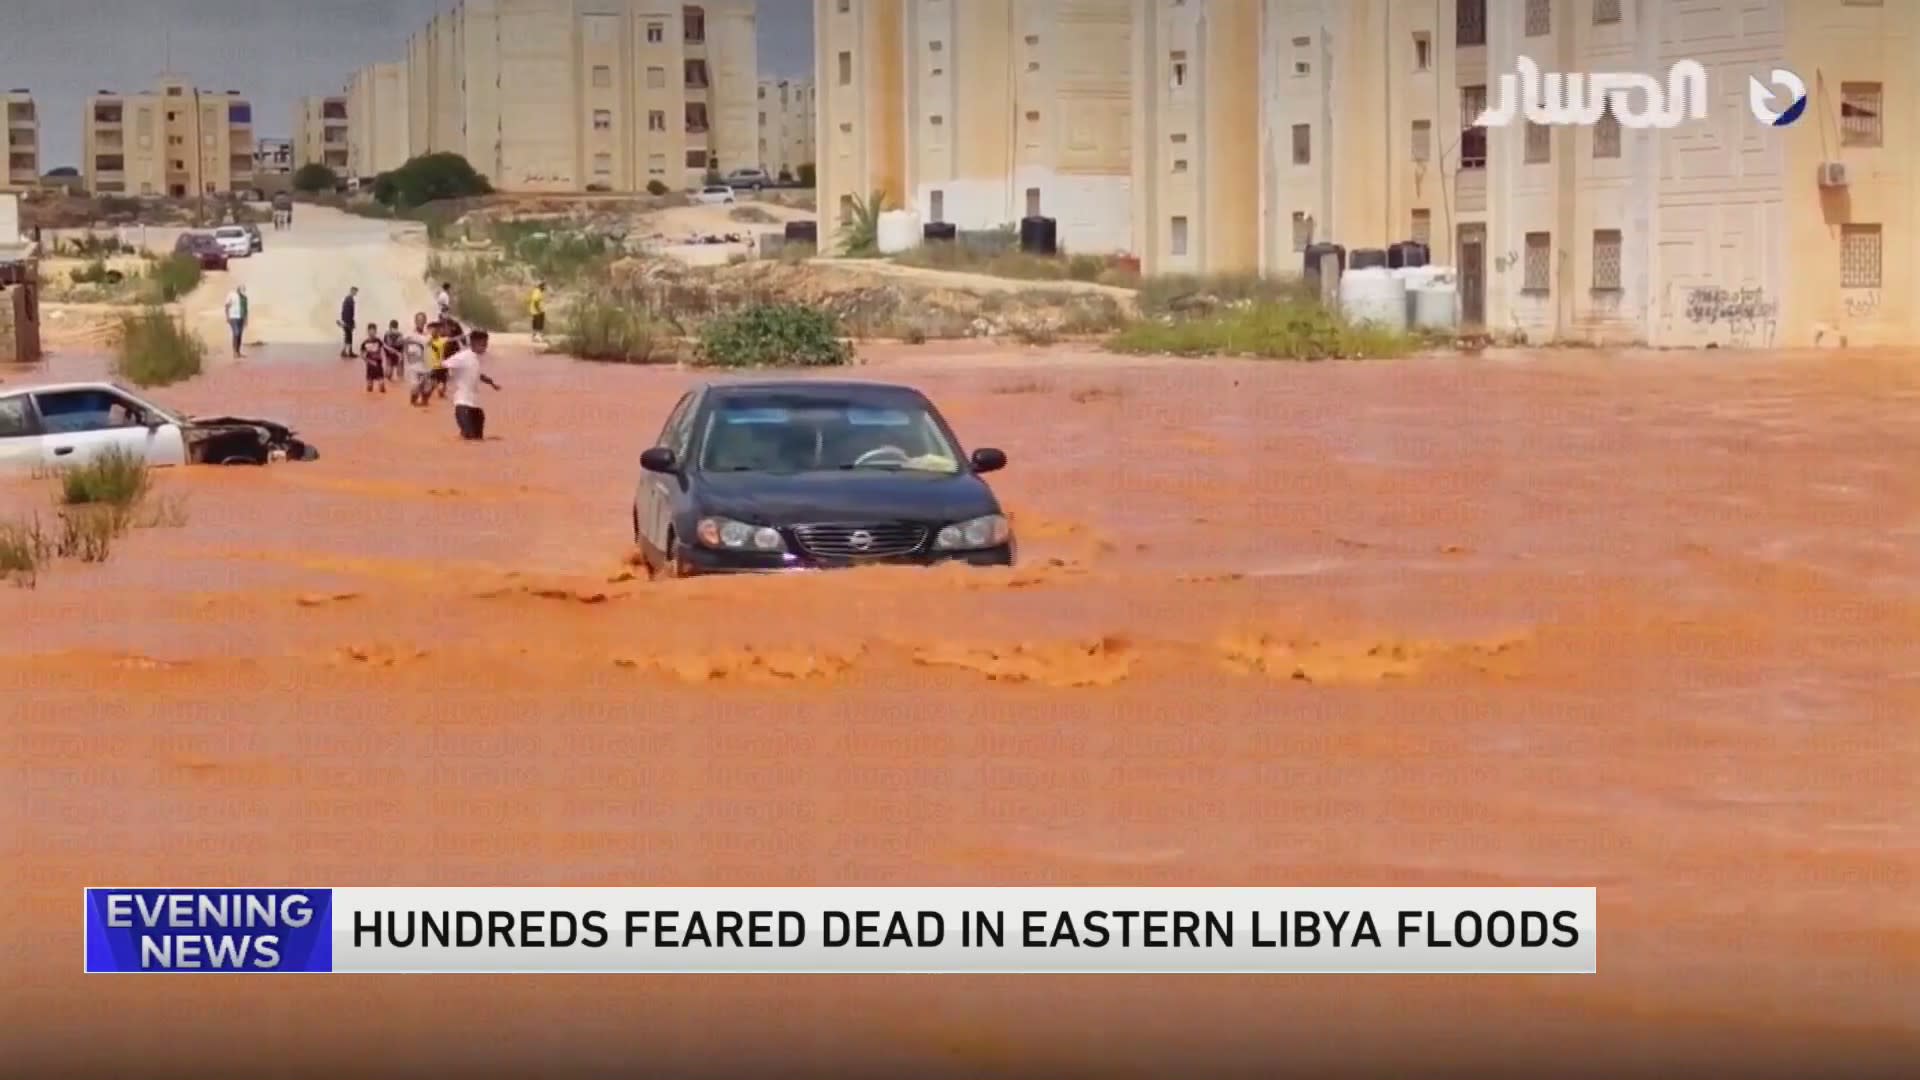 Libya’s disastrous flooding… Causes and hope?